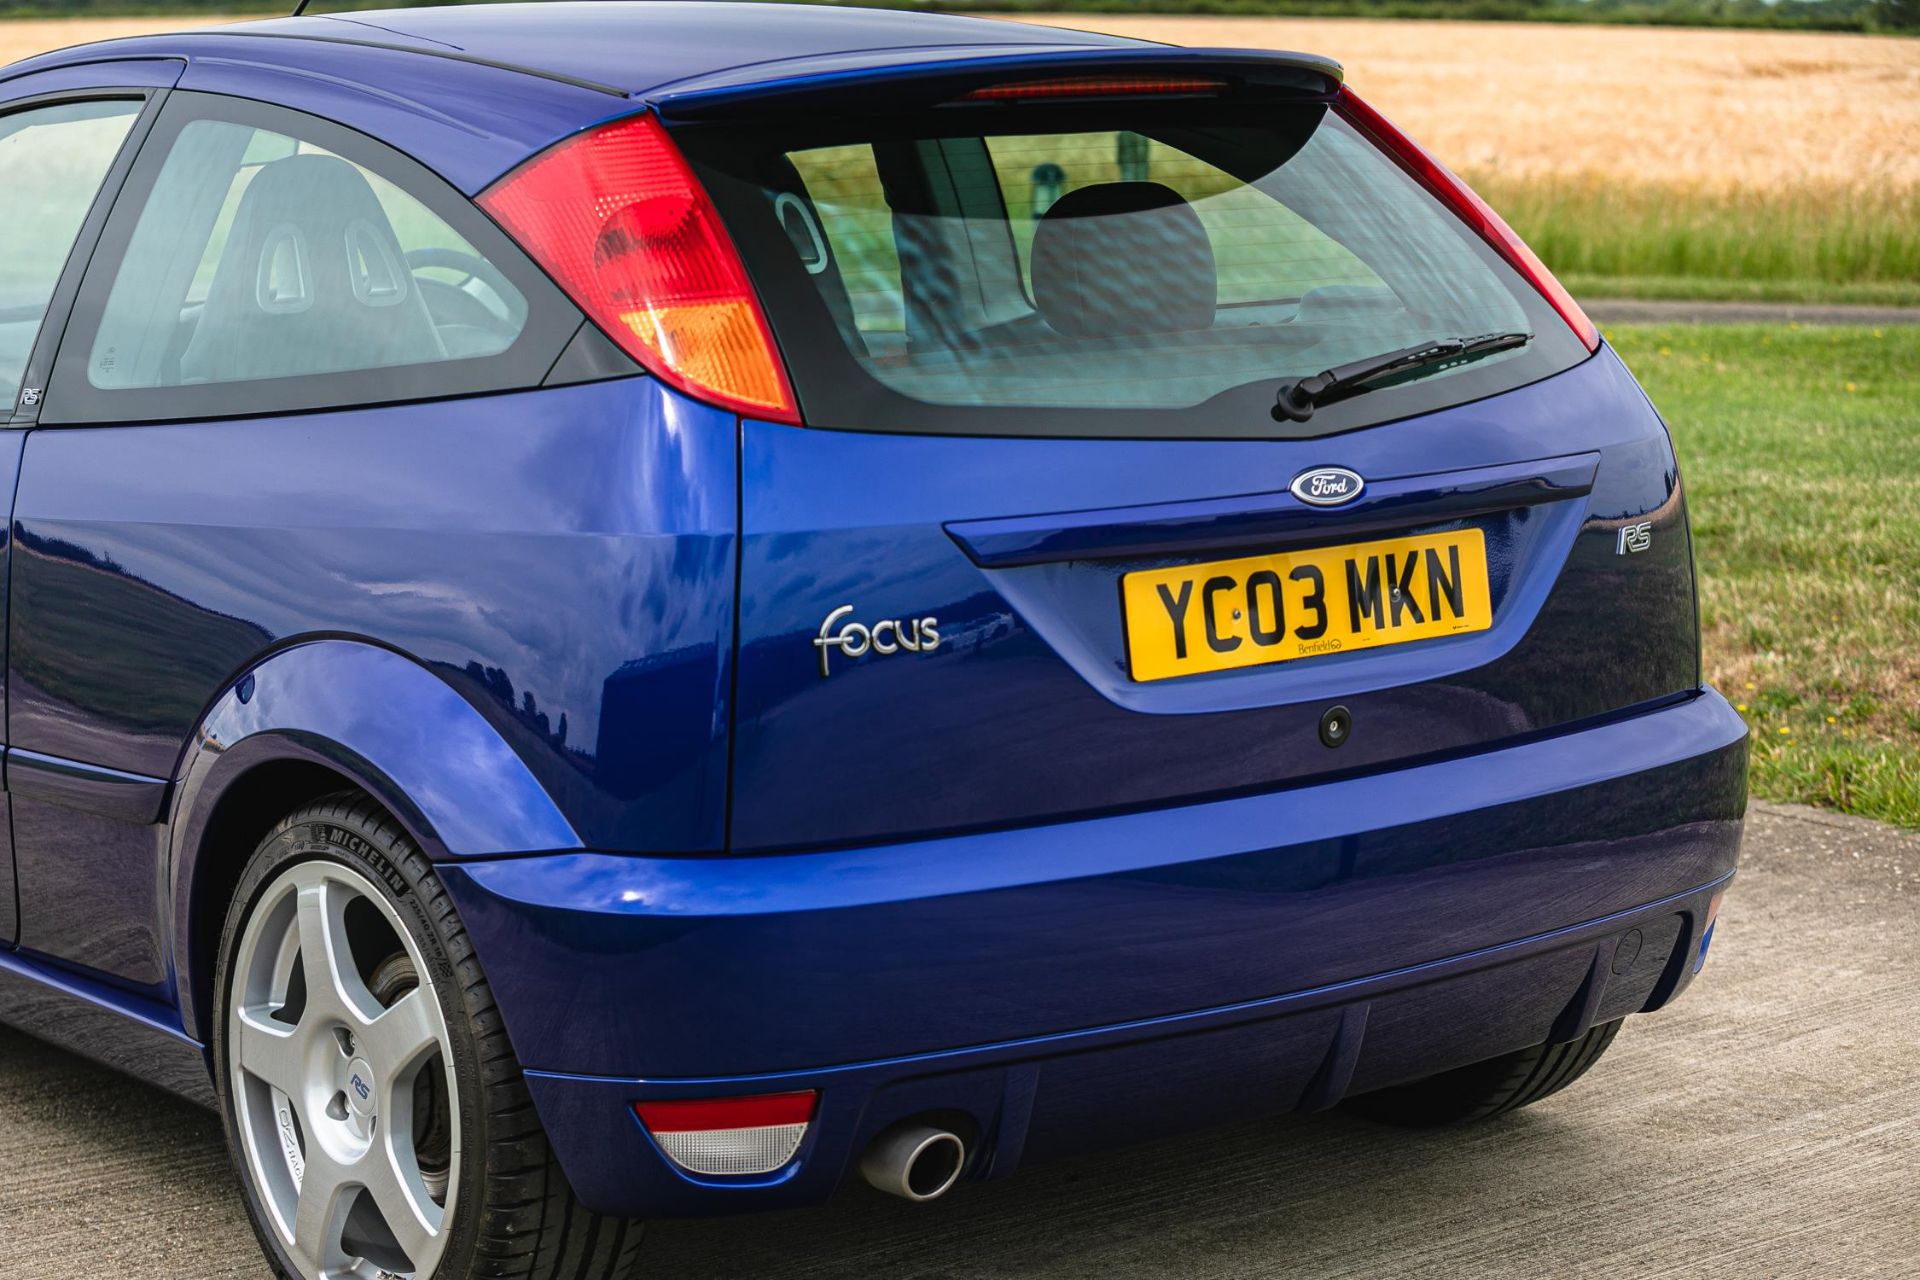 2003 Ford Focus RS Mk1 - Image 9 of 10